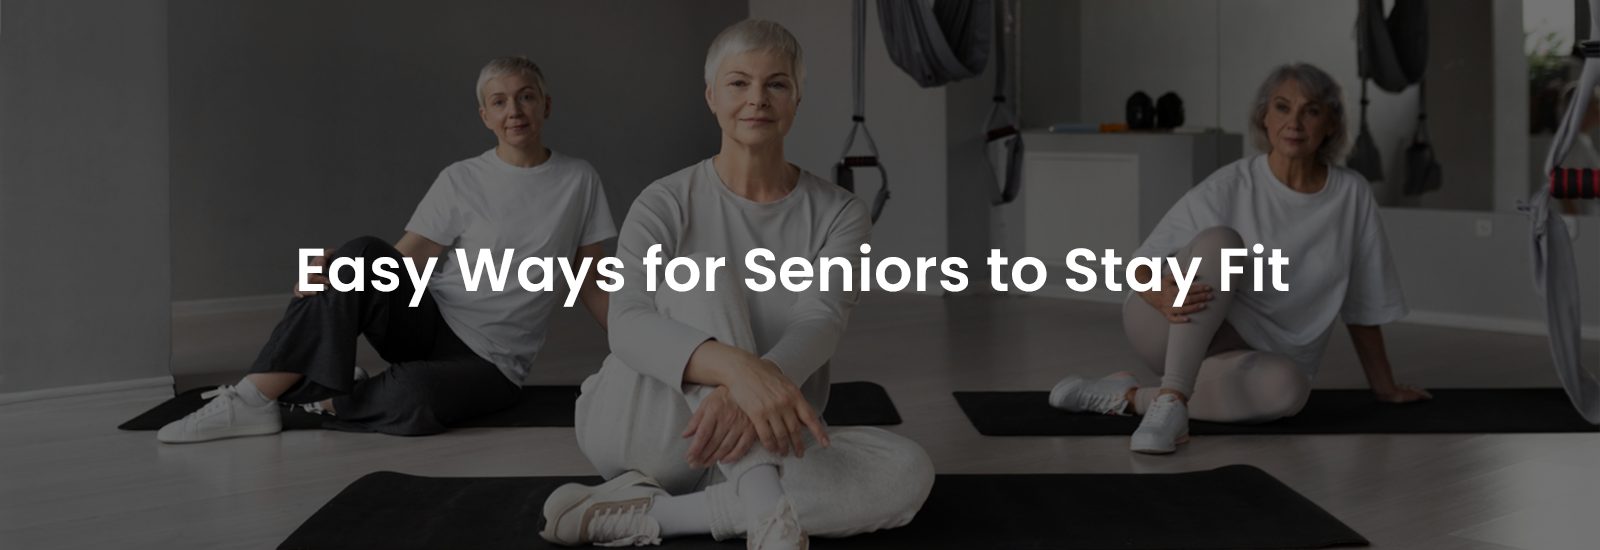 Easy Ways for Seniors to Stay Fit | Banner Image